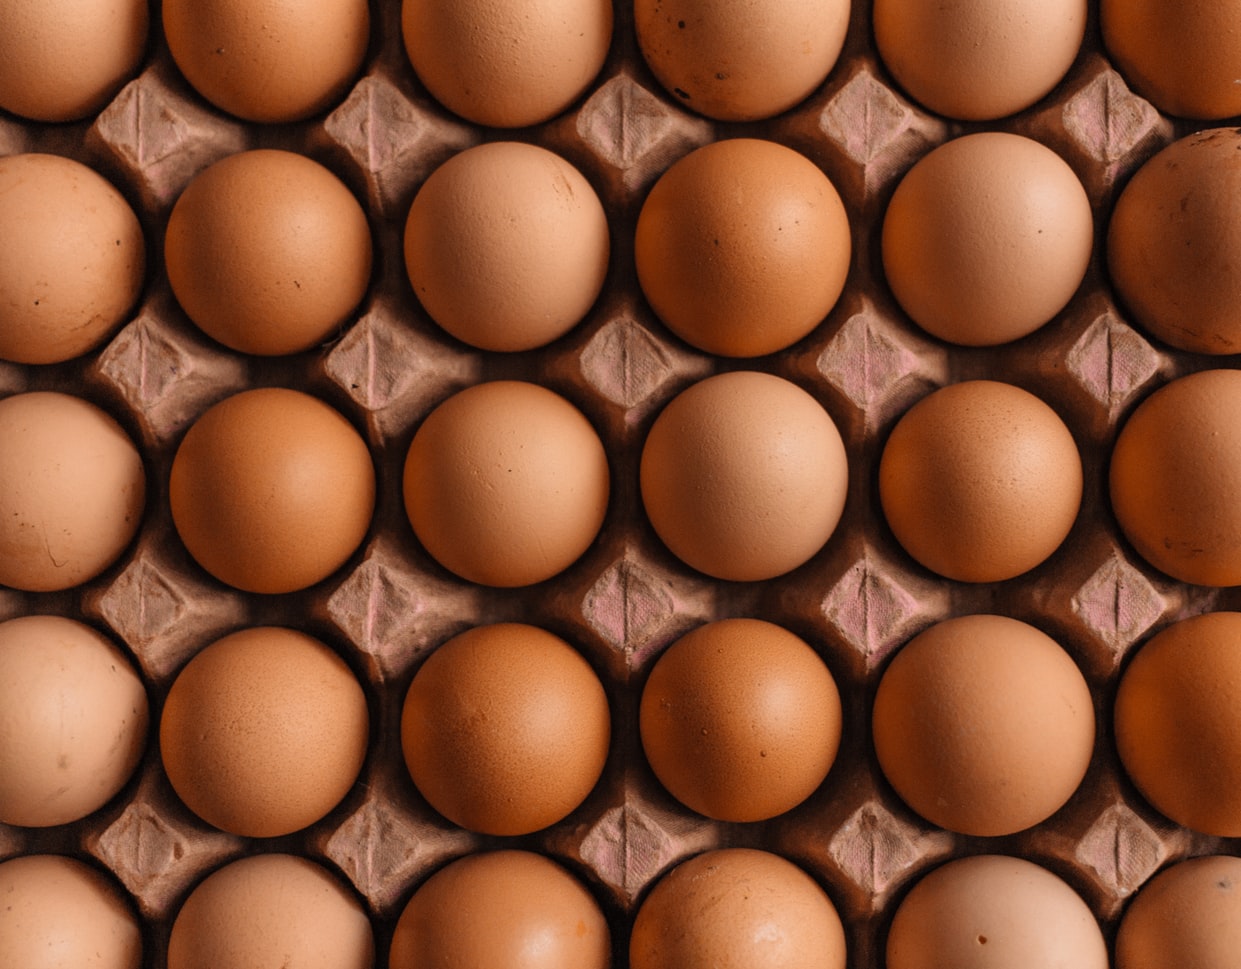 Egg & Poultry Stock Prices Have Diverged in the US. What’s Next?